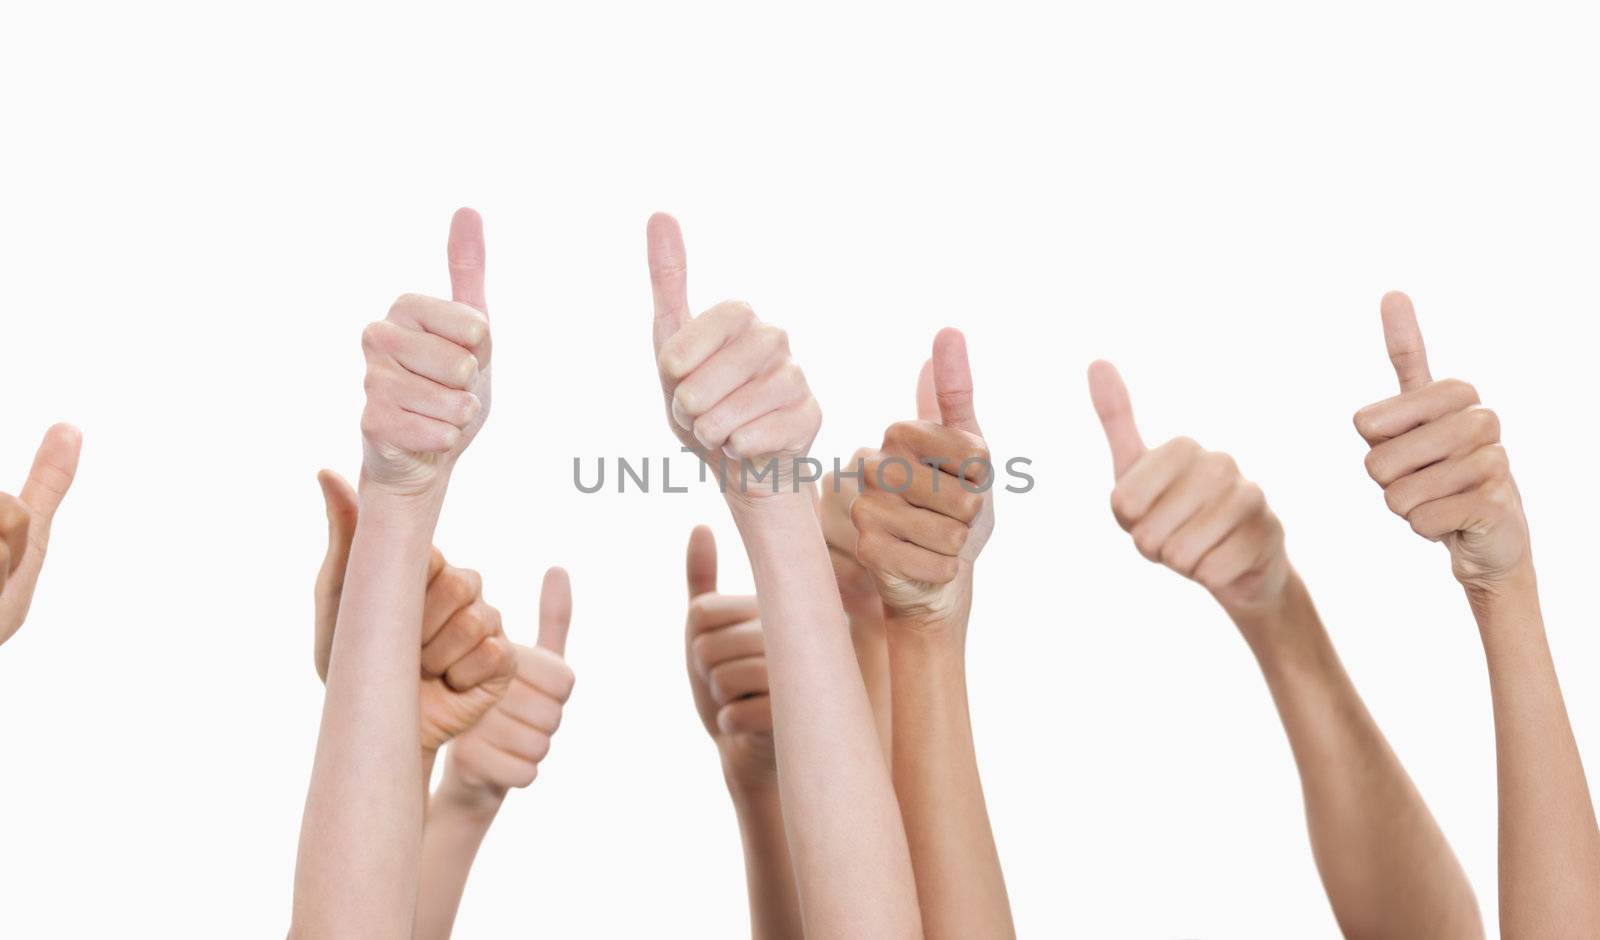 Thumbs raised and hands up  by Wavebreakmedia